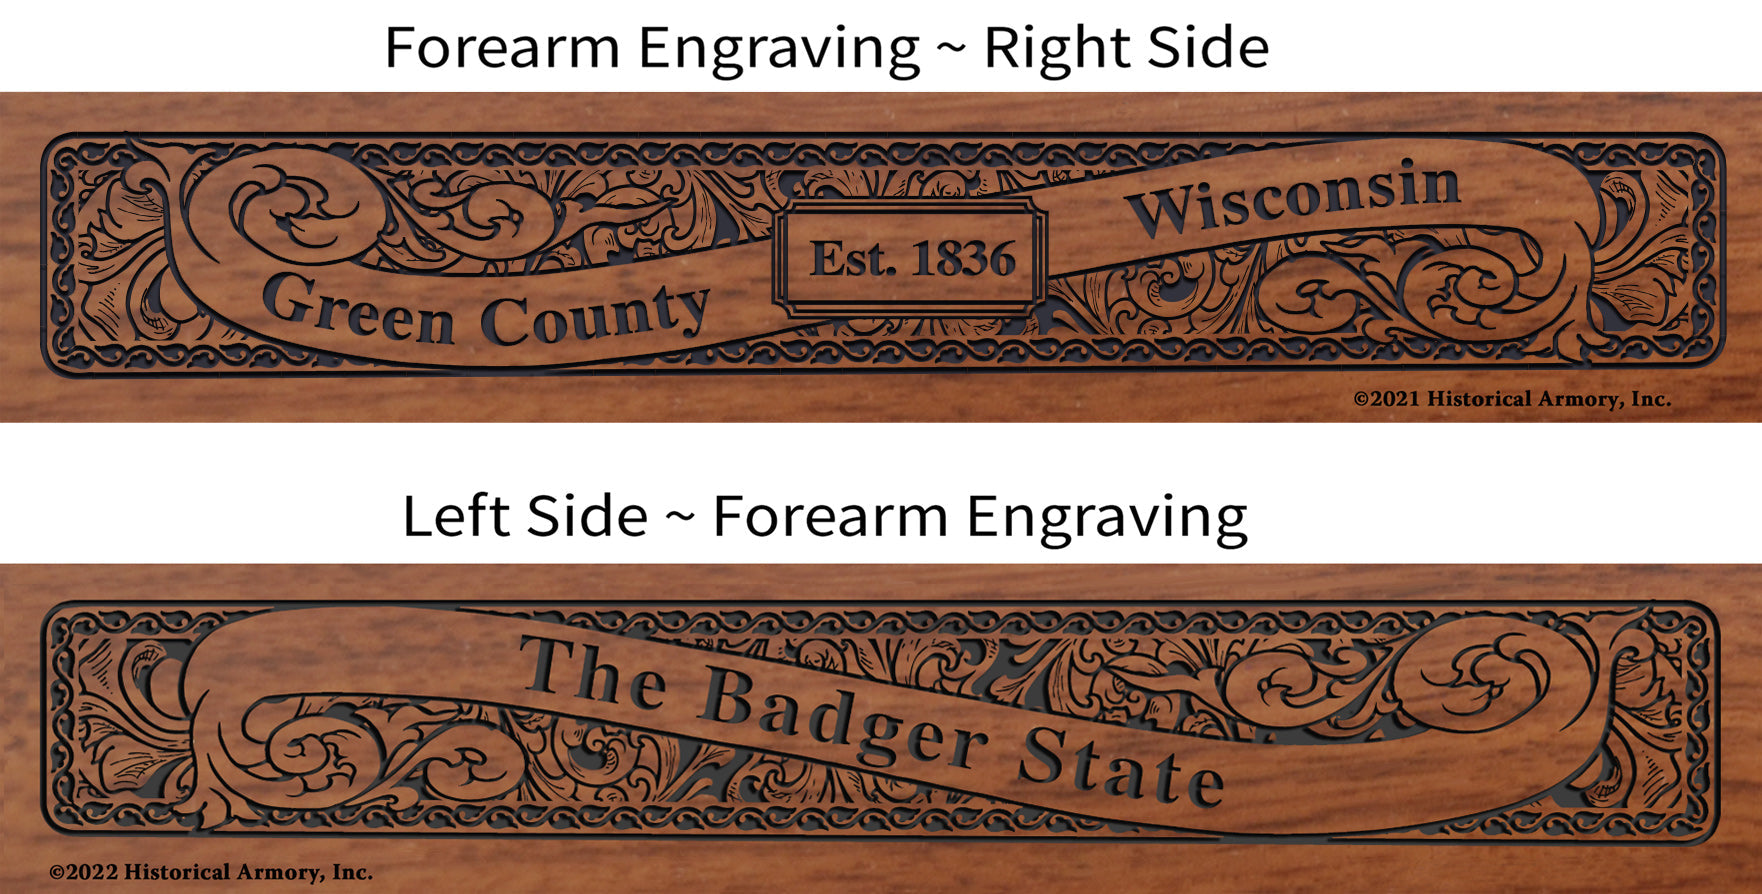 Green County Wisconsin Engraved Rifle Forearm